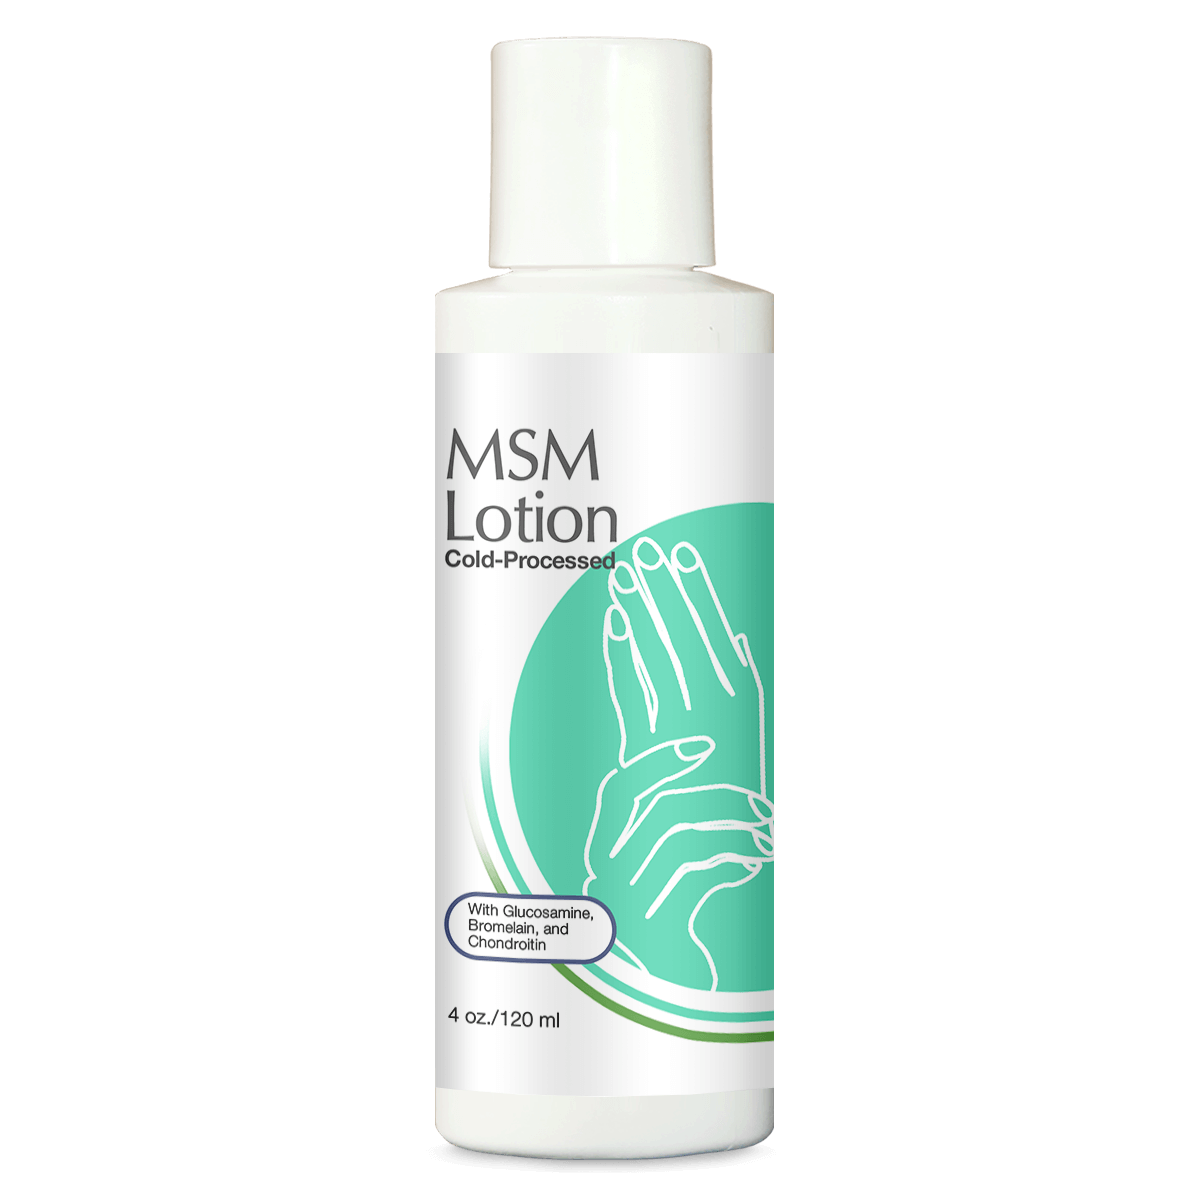 MSM Lotion Cold-Processed with Glucosamine